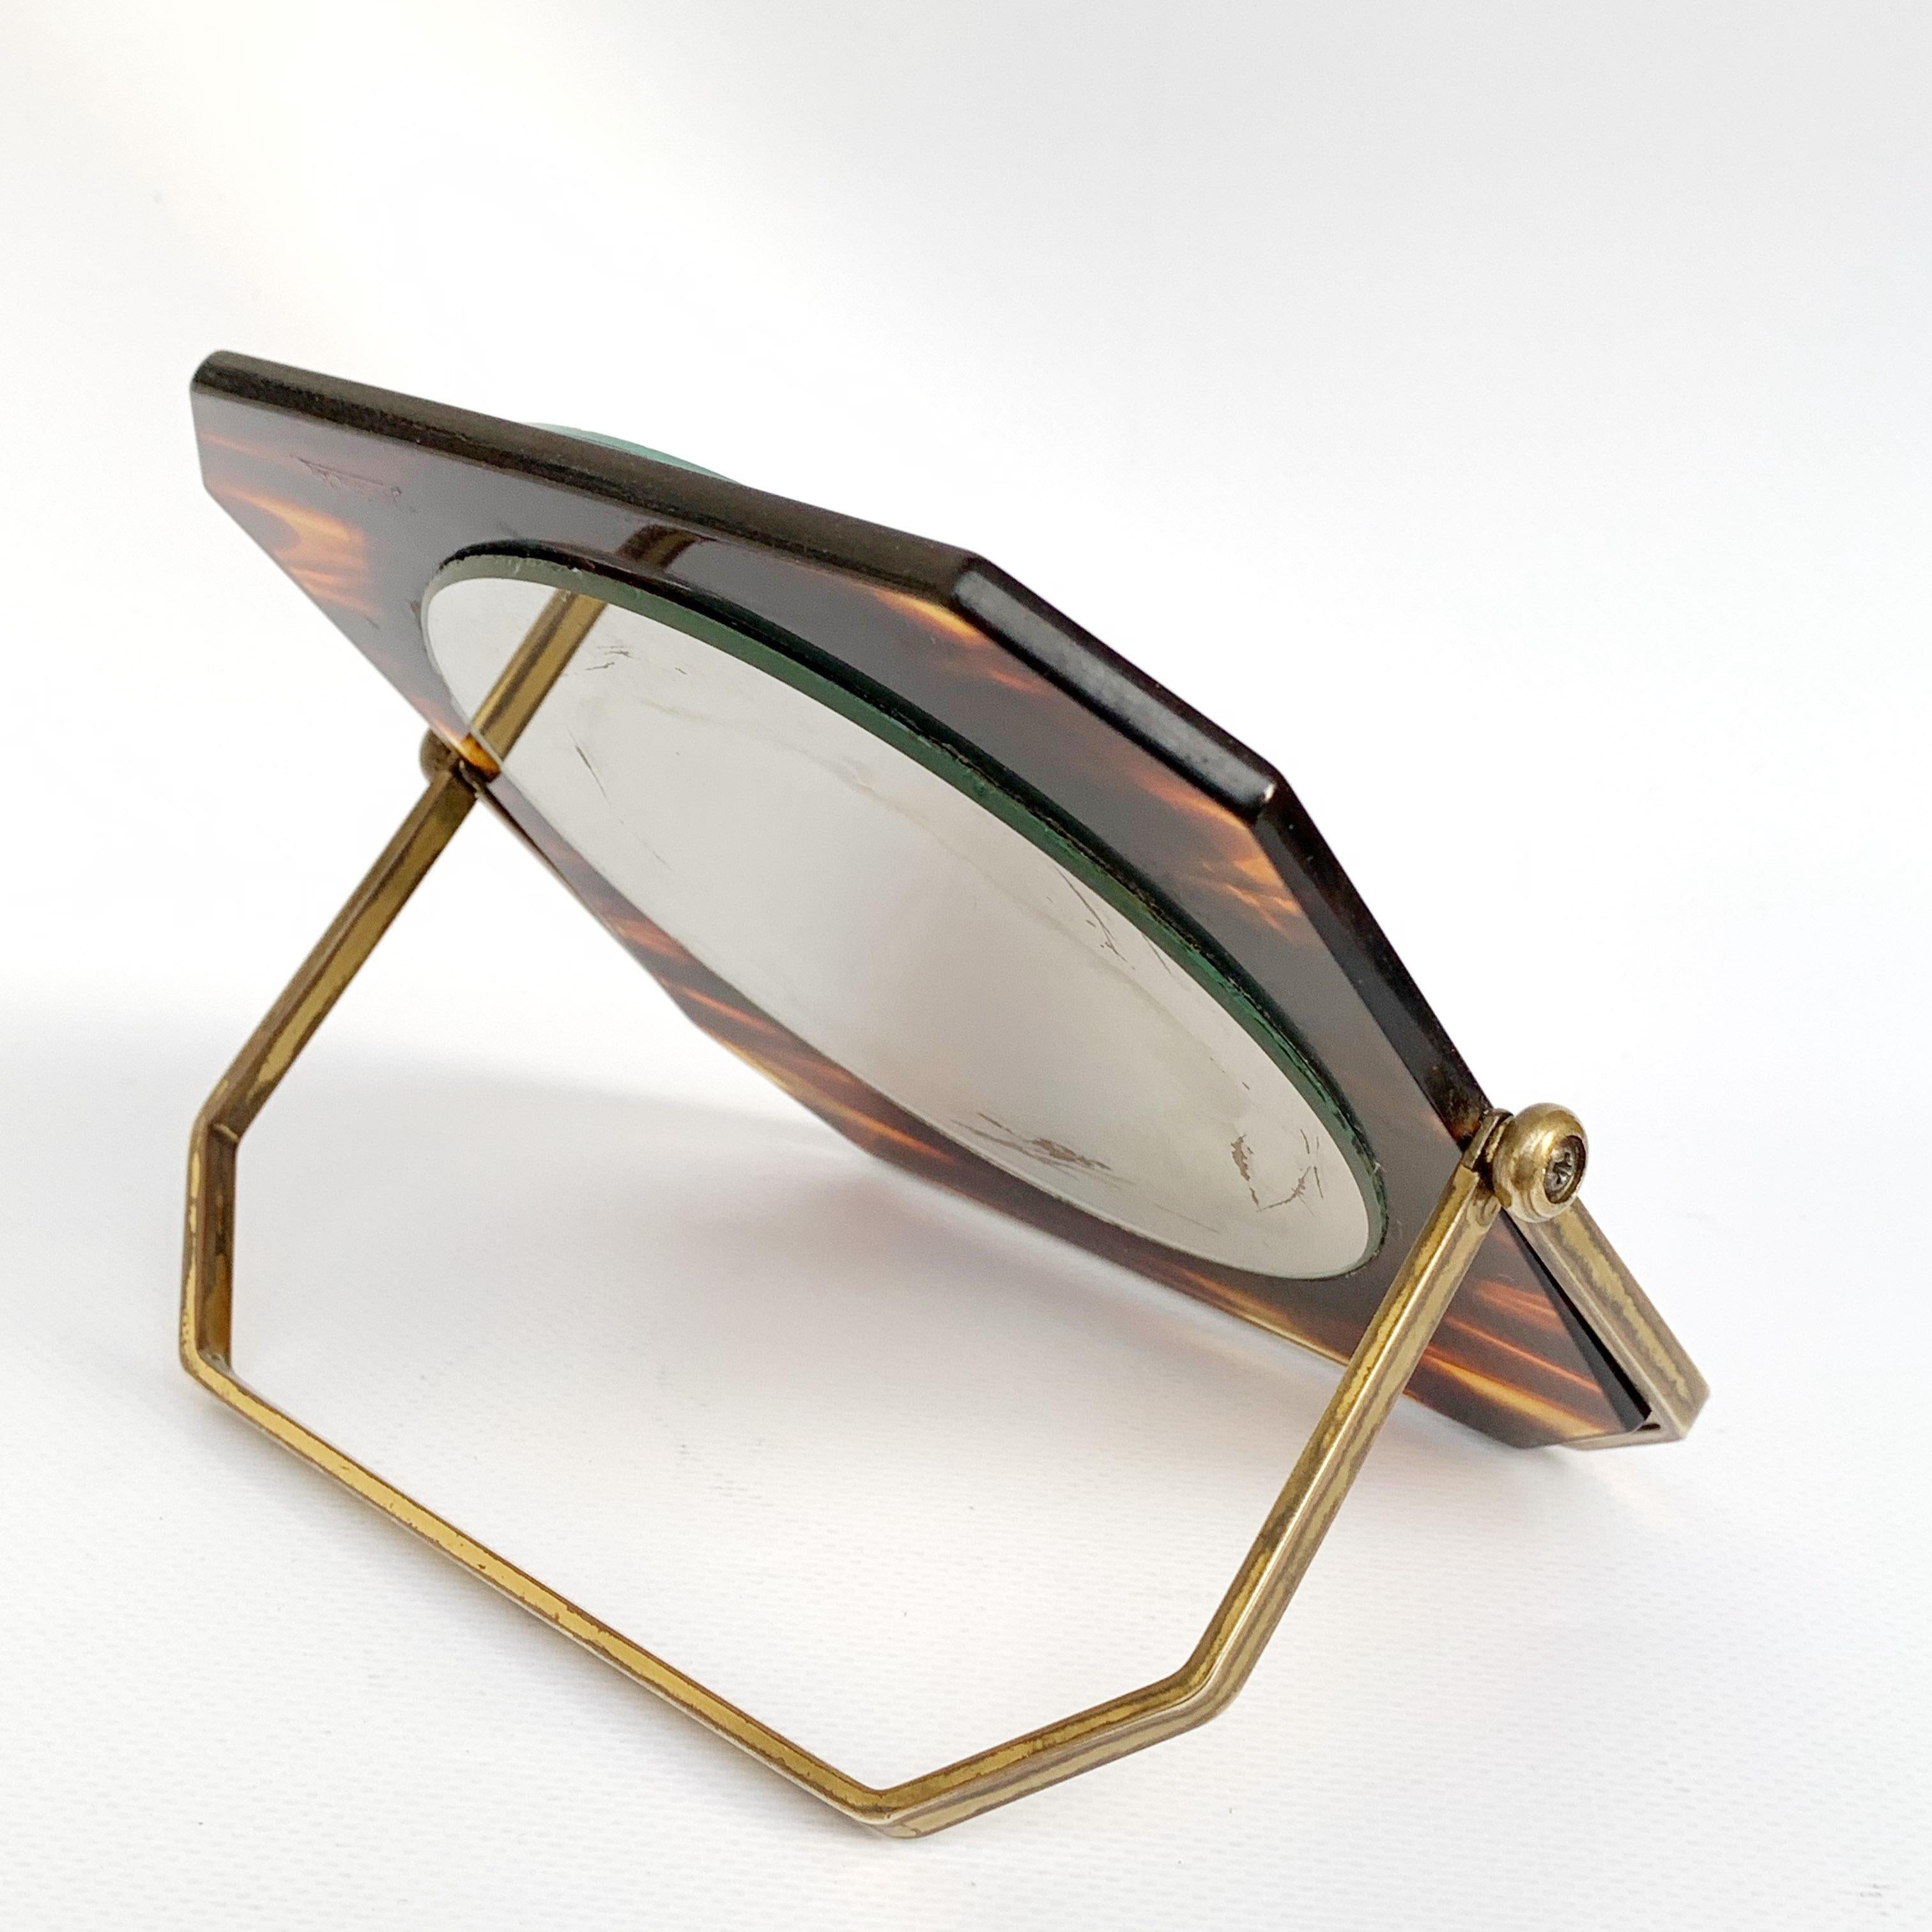 Table Mirror, Brass and Tortoise Plexiglass, Double-Sided Vanity, Italy 1970s For Sale 3